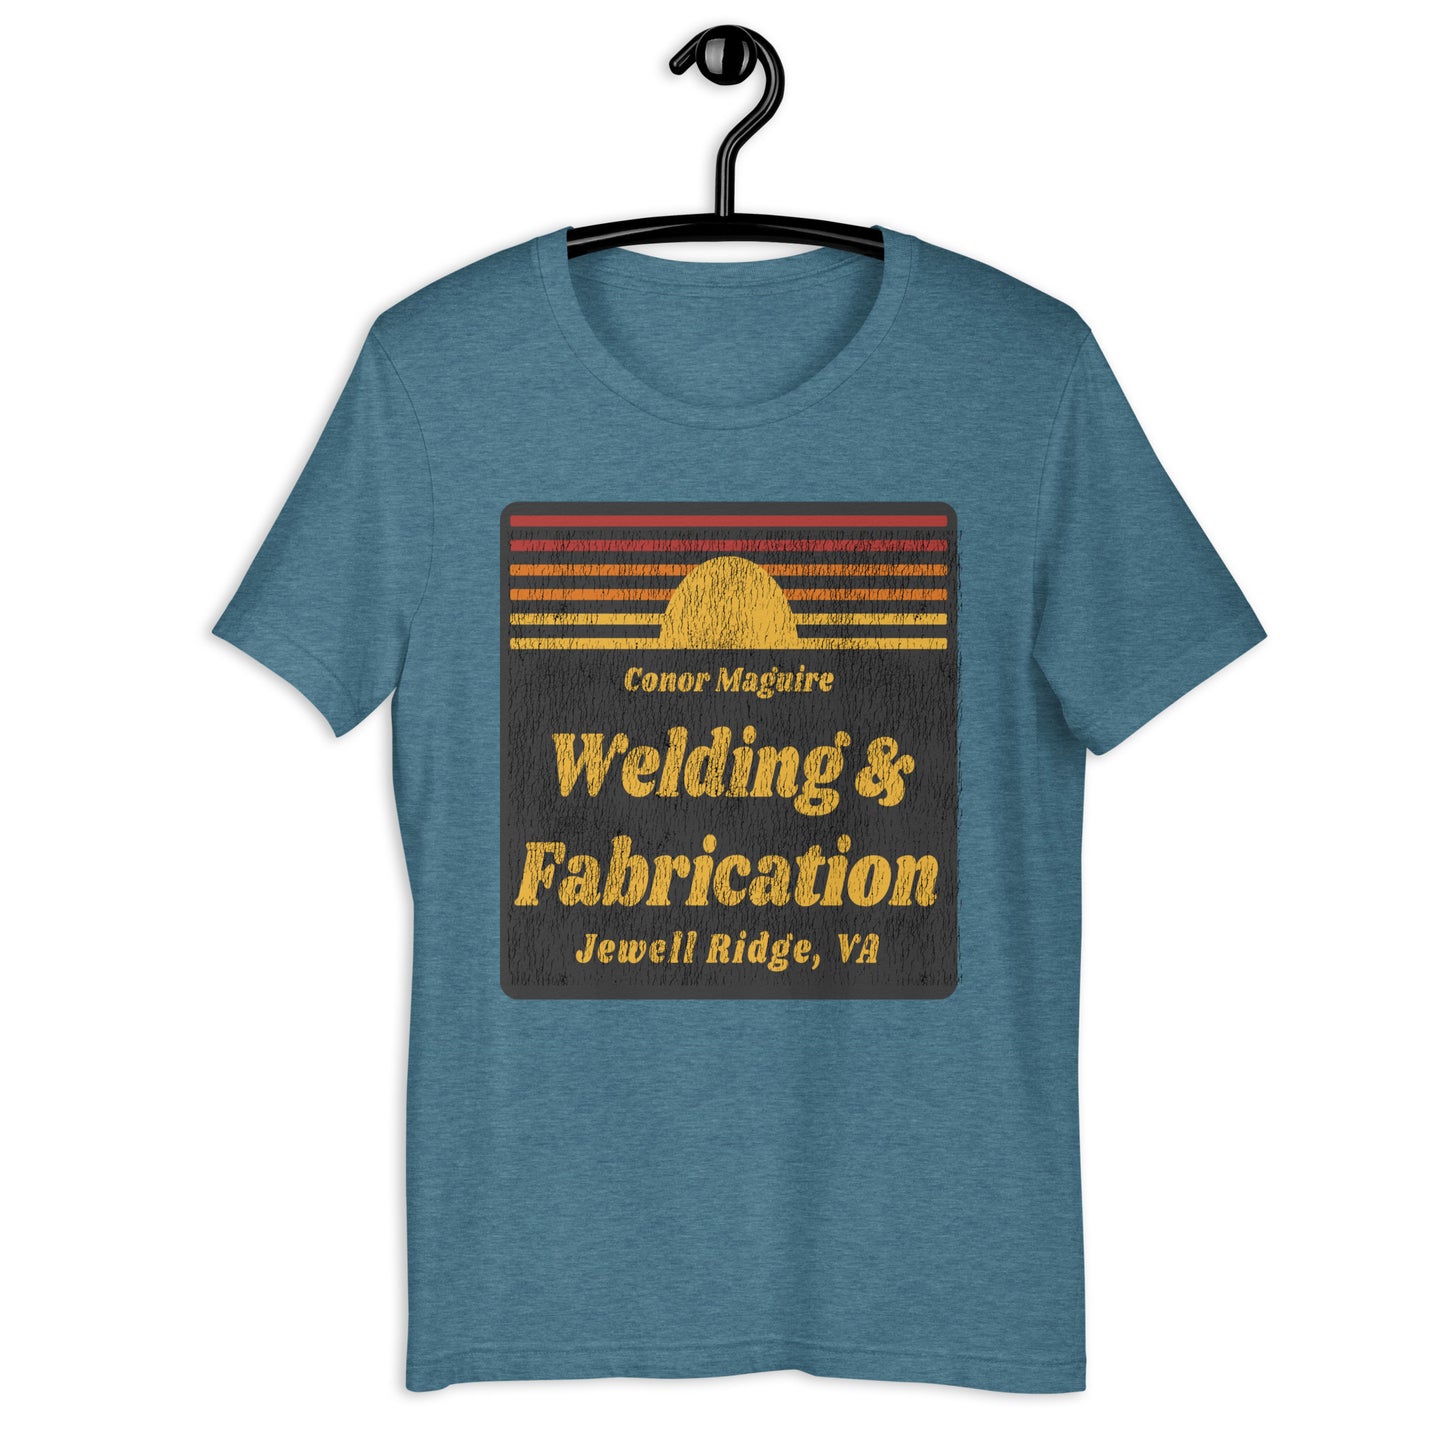 Conor Maguire Welding & Fabrication Crackled Sunset Unisex t-shirt